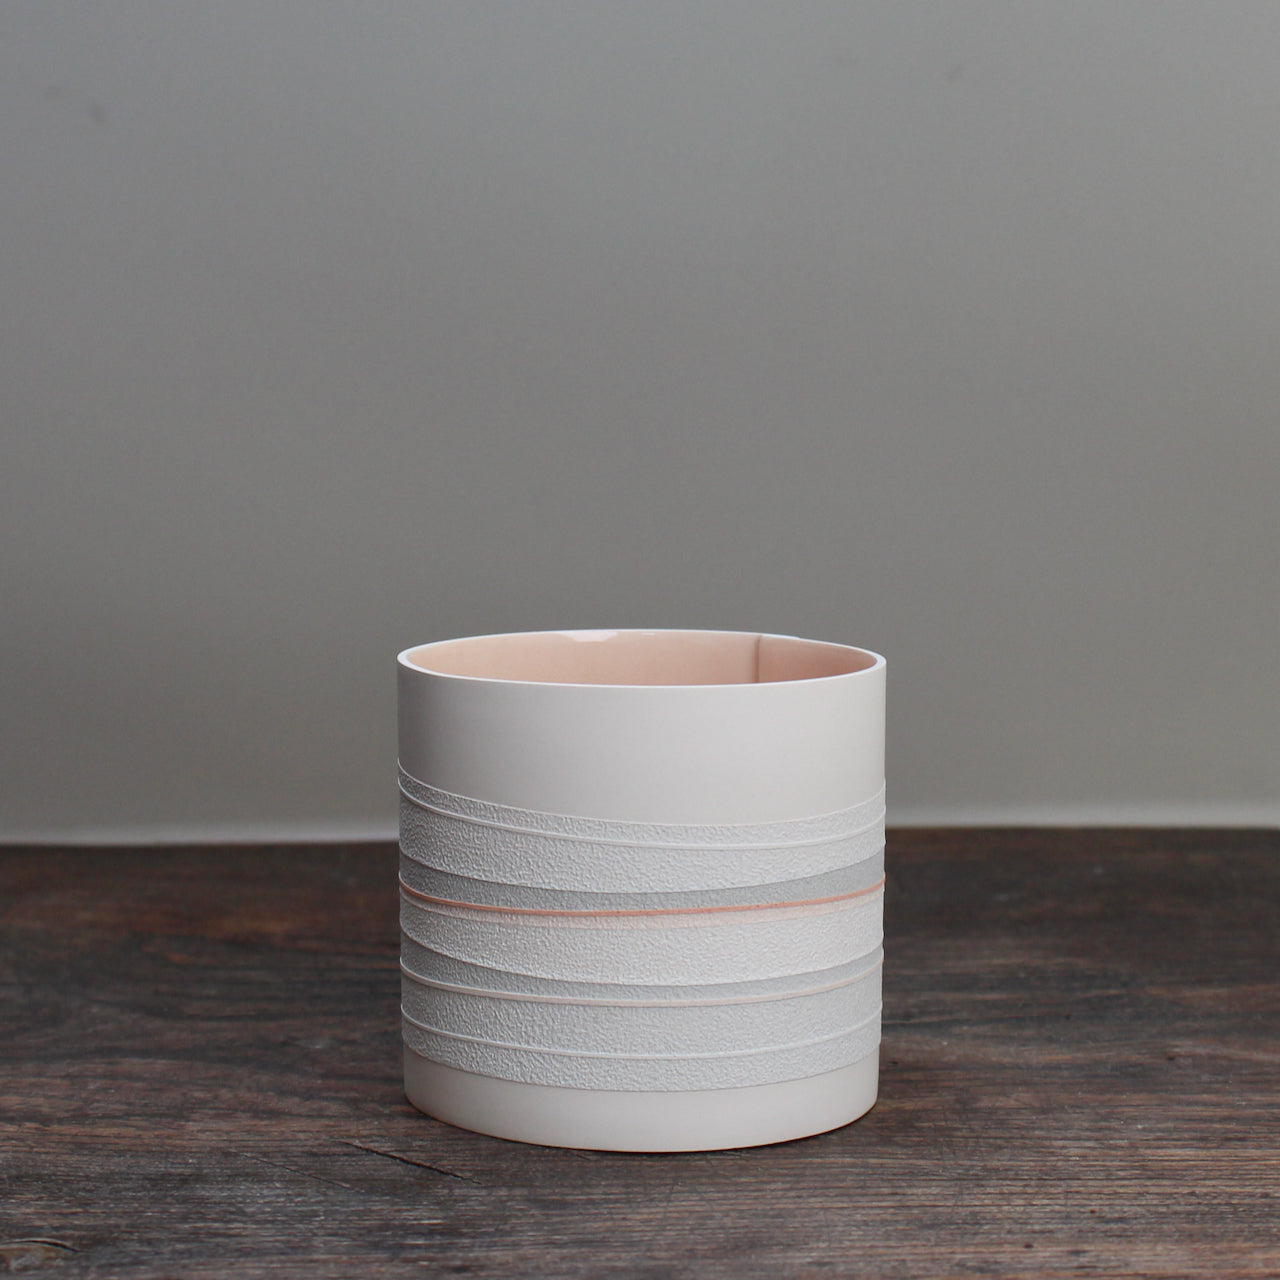 a white ceramic pot with a pale pink interior and pink and grey stripes on the outside sitting on a wooden table.